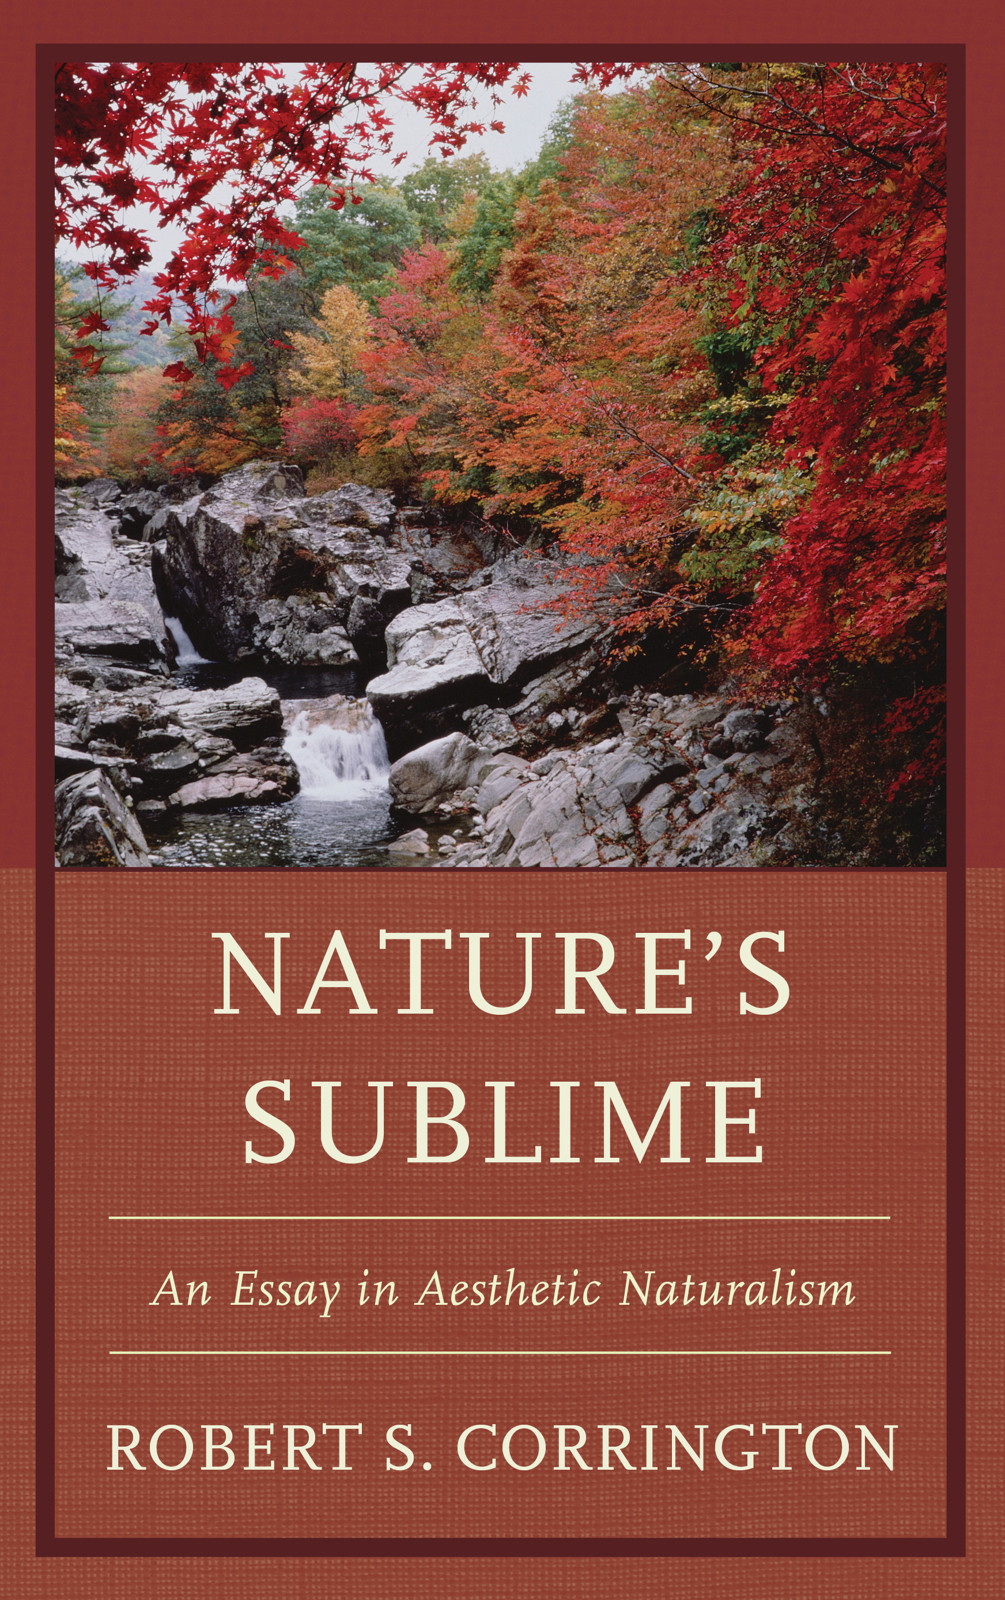 Natures Sublime Natures Sublime An Essay in Aesthetic Naturalism Robert S - photo 1